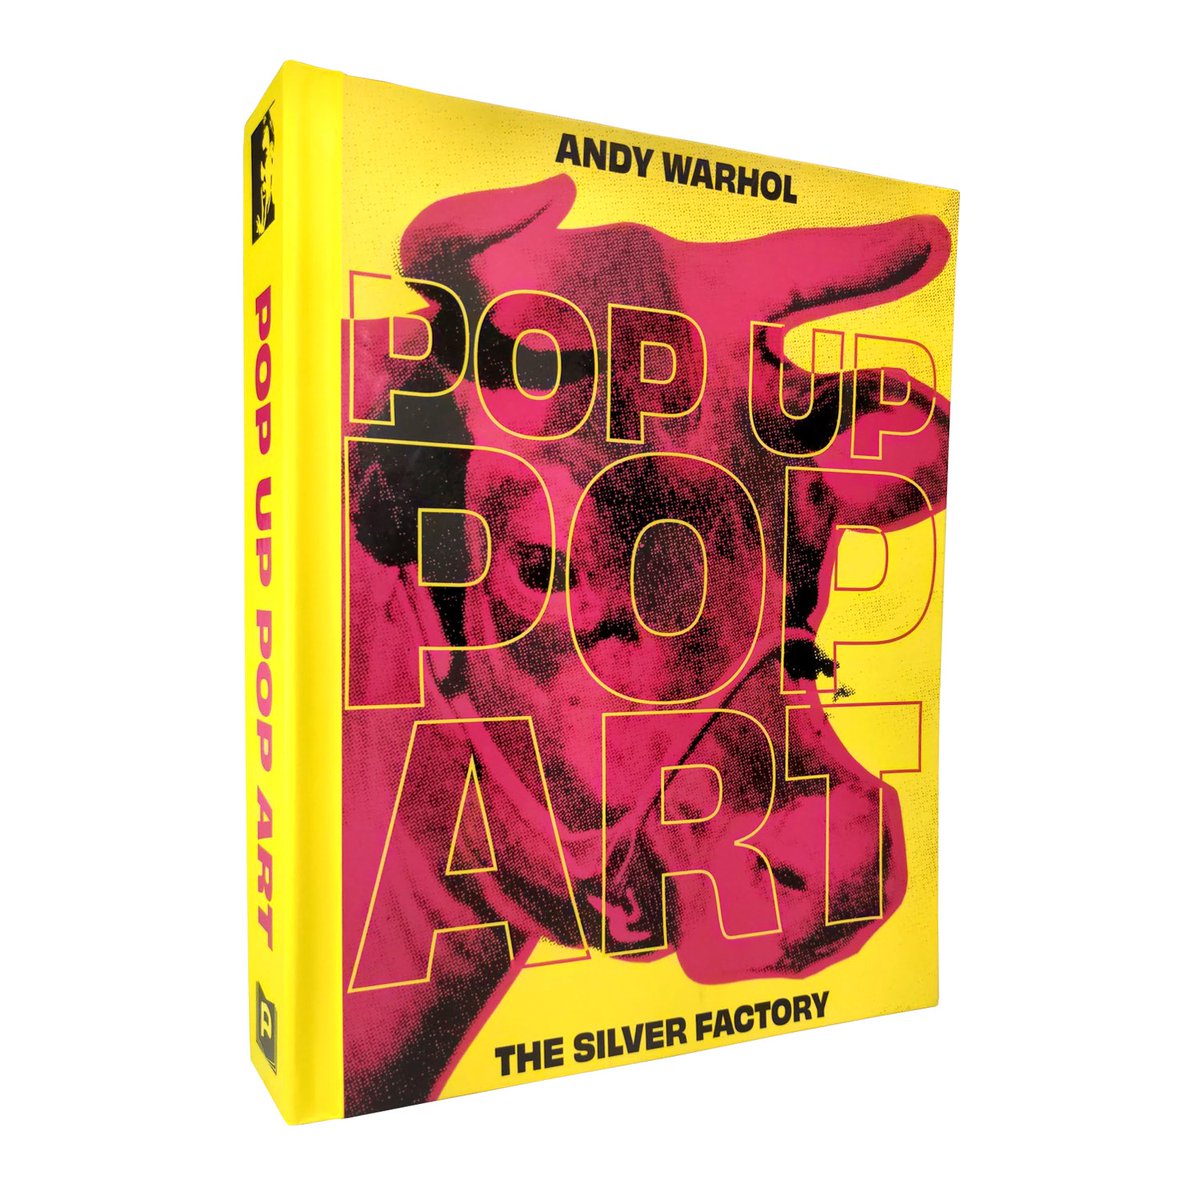 Andy Warhol's Cow graces the cover of both editions of the Pop Up Pop Art Silver Factory book 🐮📚 Visit PopositionPress.com to pre-order the Andy Warhol Pop Up Pop Art Silver Factory Collection - in production now! #BookTwitter #andywarhol #bookcovers #popup #popart